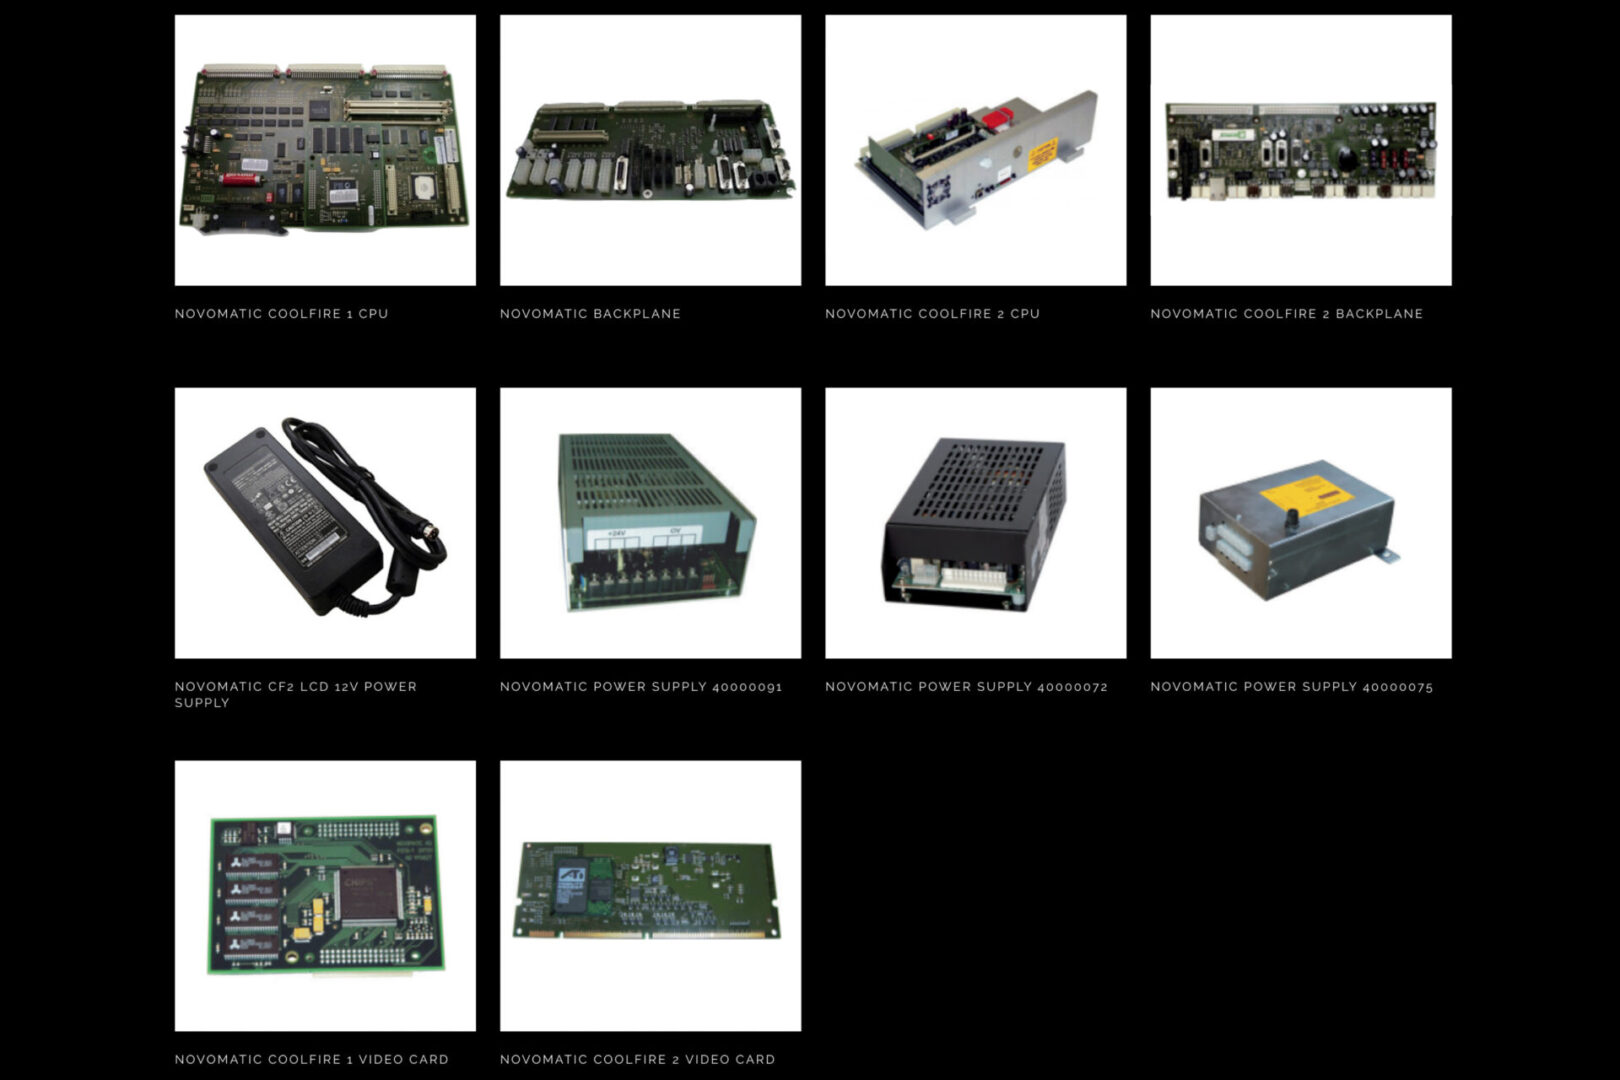 A series of pictures showing different types of computer equipment.